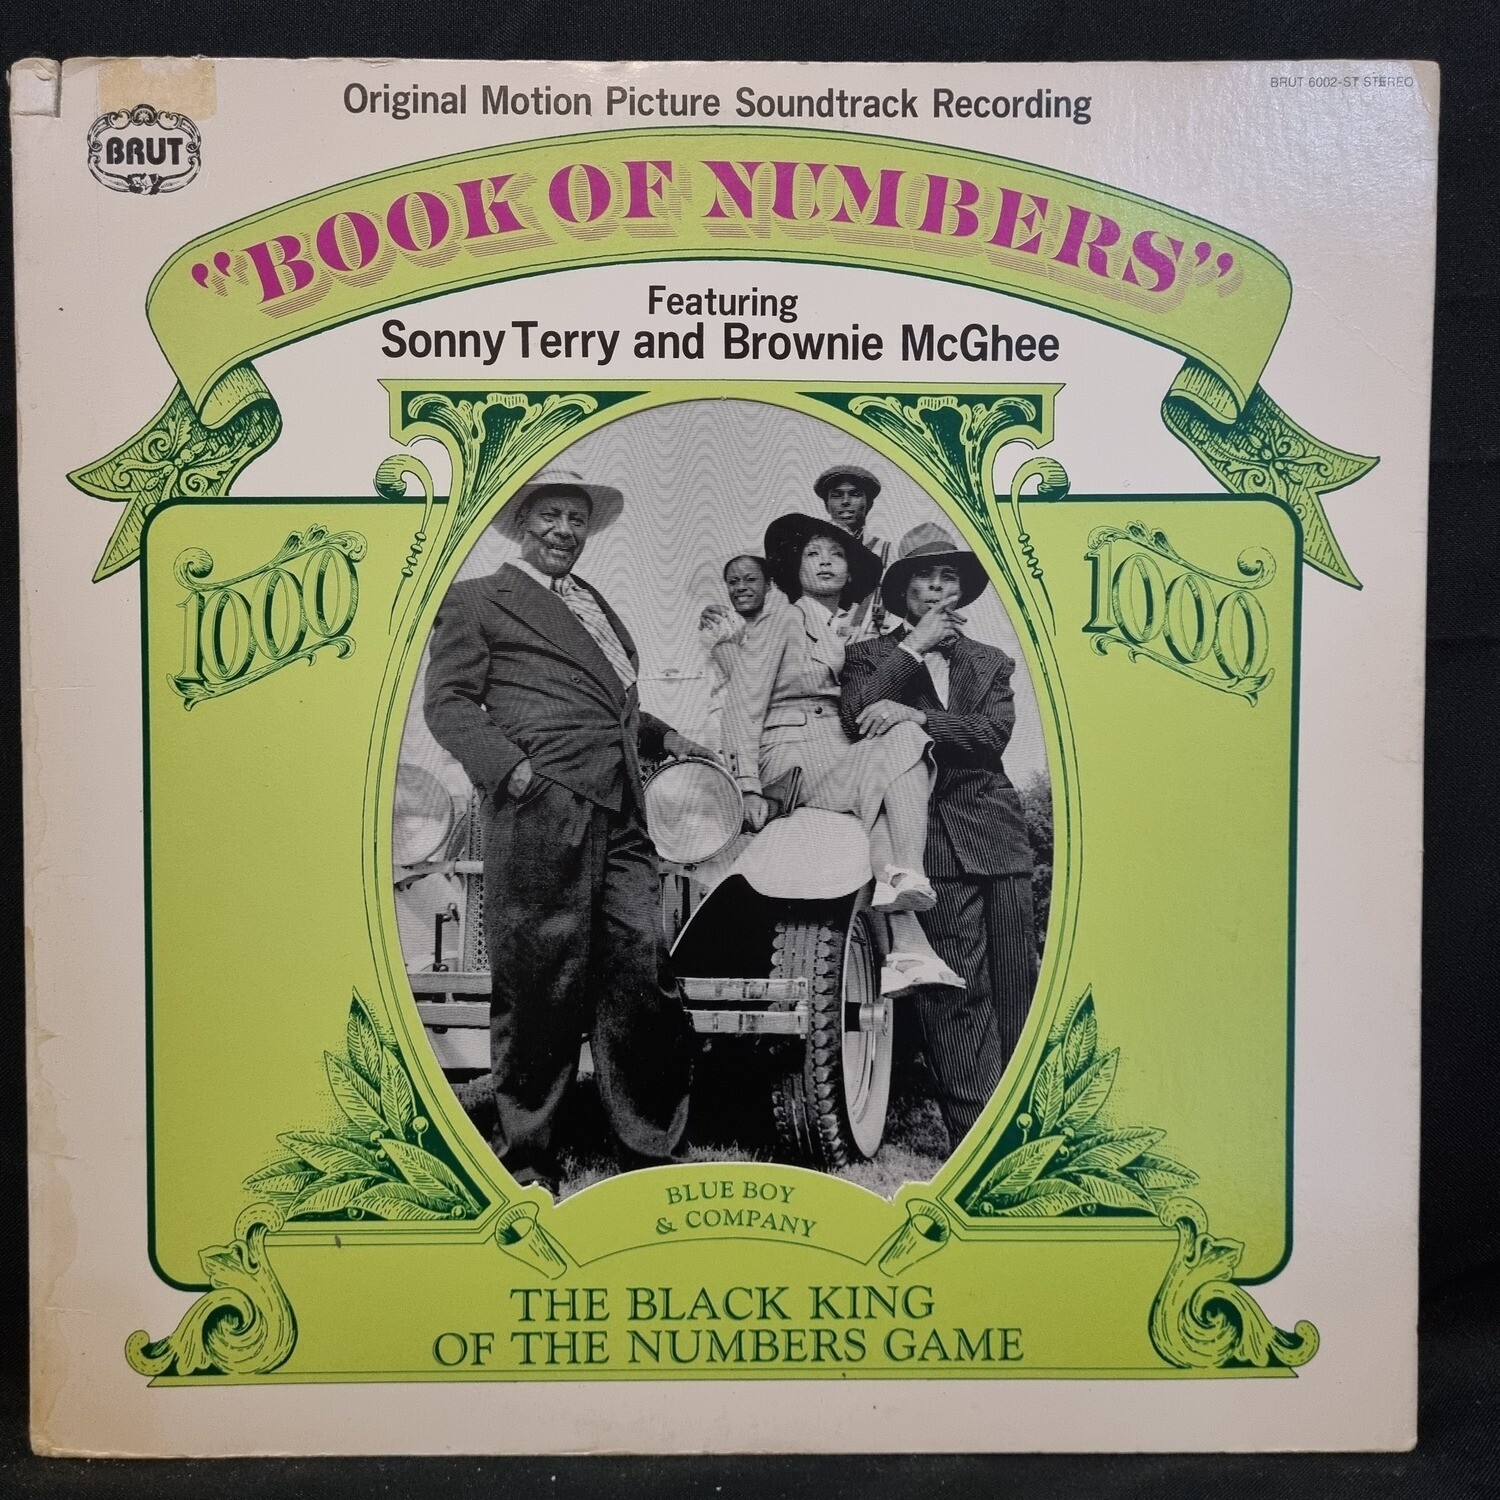 Sonny Terry & Brownie McGhee- Book of Numbers (Original Motion Picture Soundtrack)